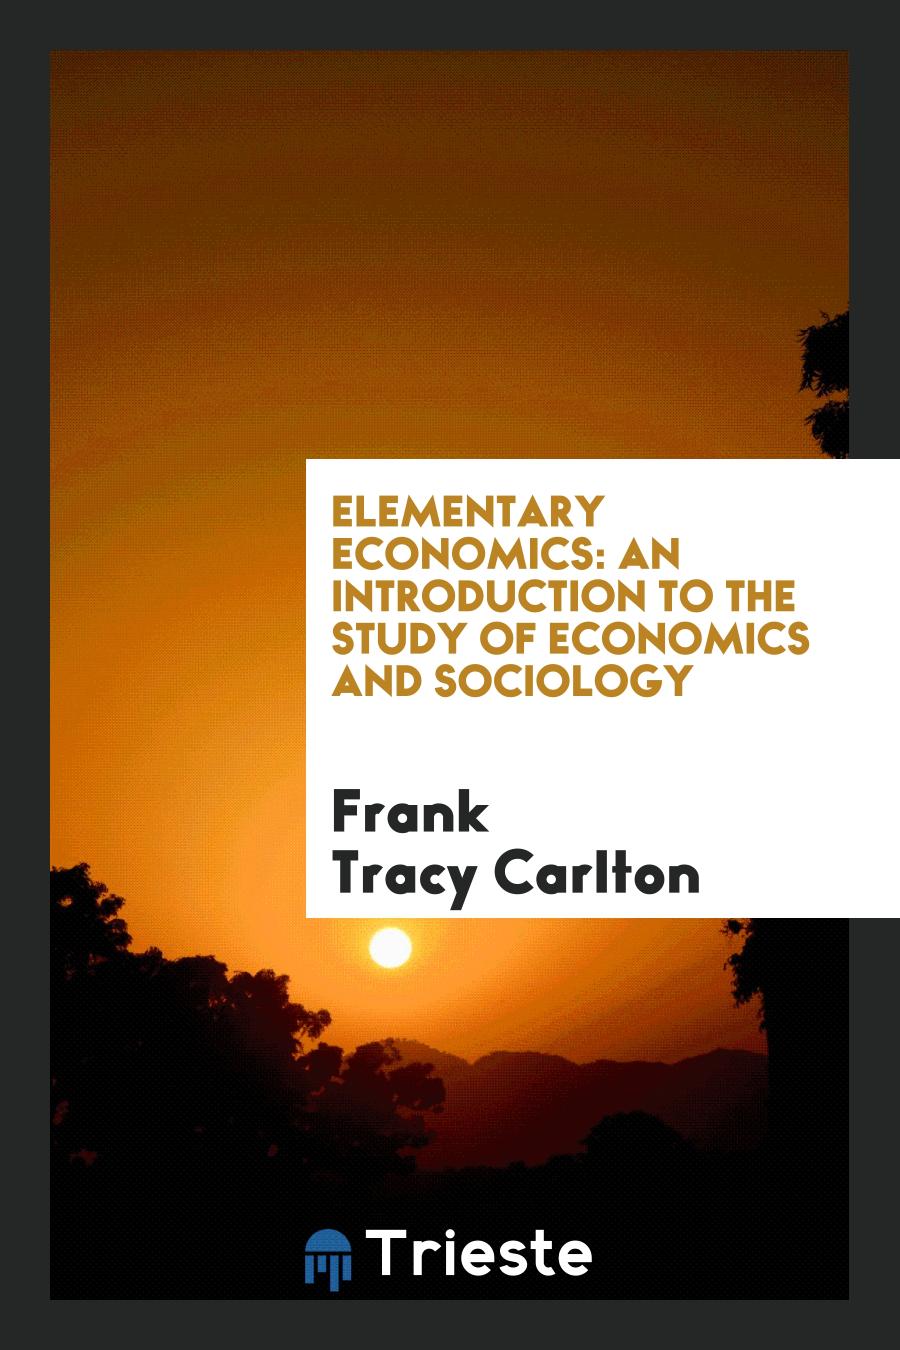 Elementary Economics: An Introduction to the Study of Economics and Sociology